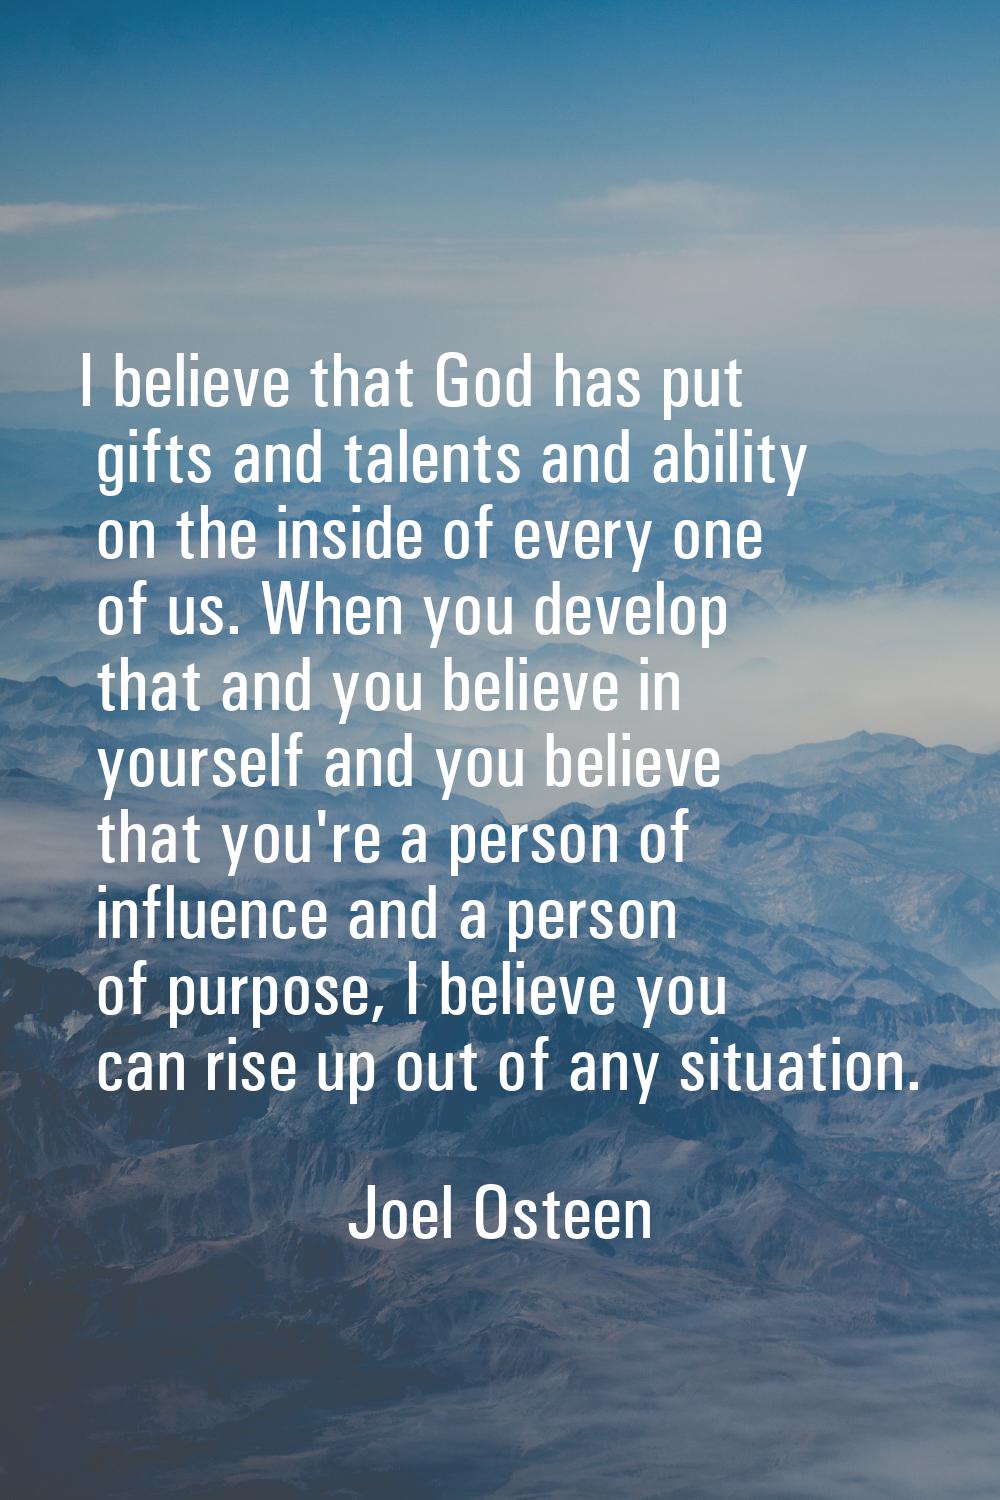 I believe that God has put gifts and talents and ability on the inside of every one of us. When you